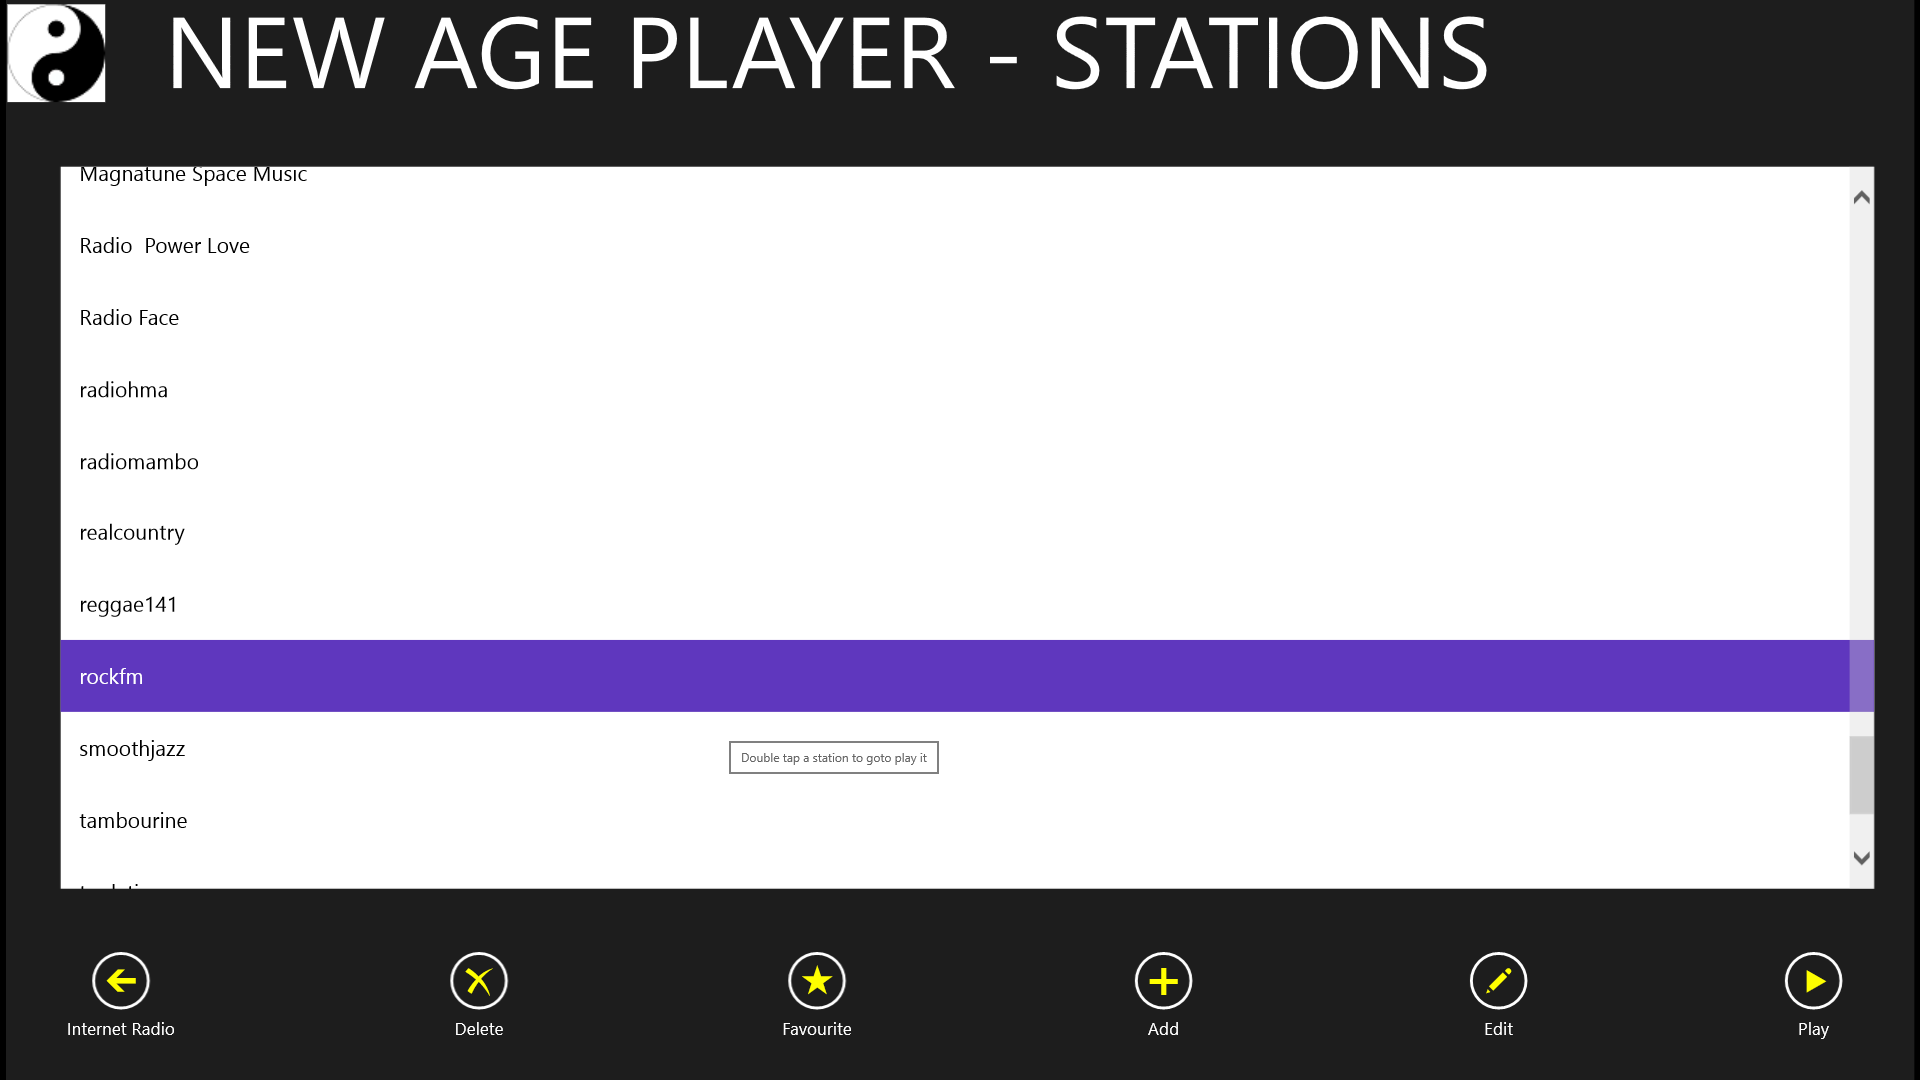 Stations screen